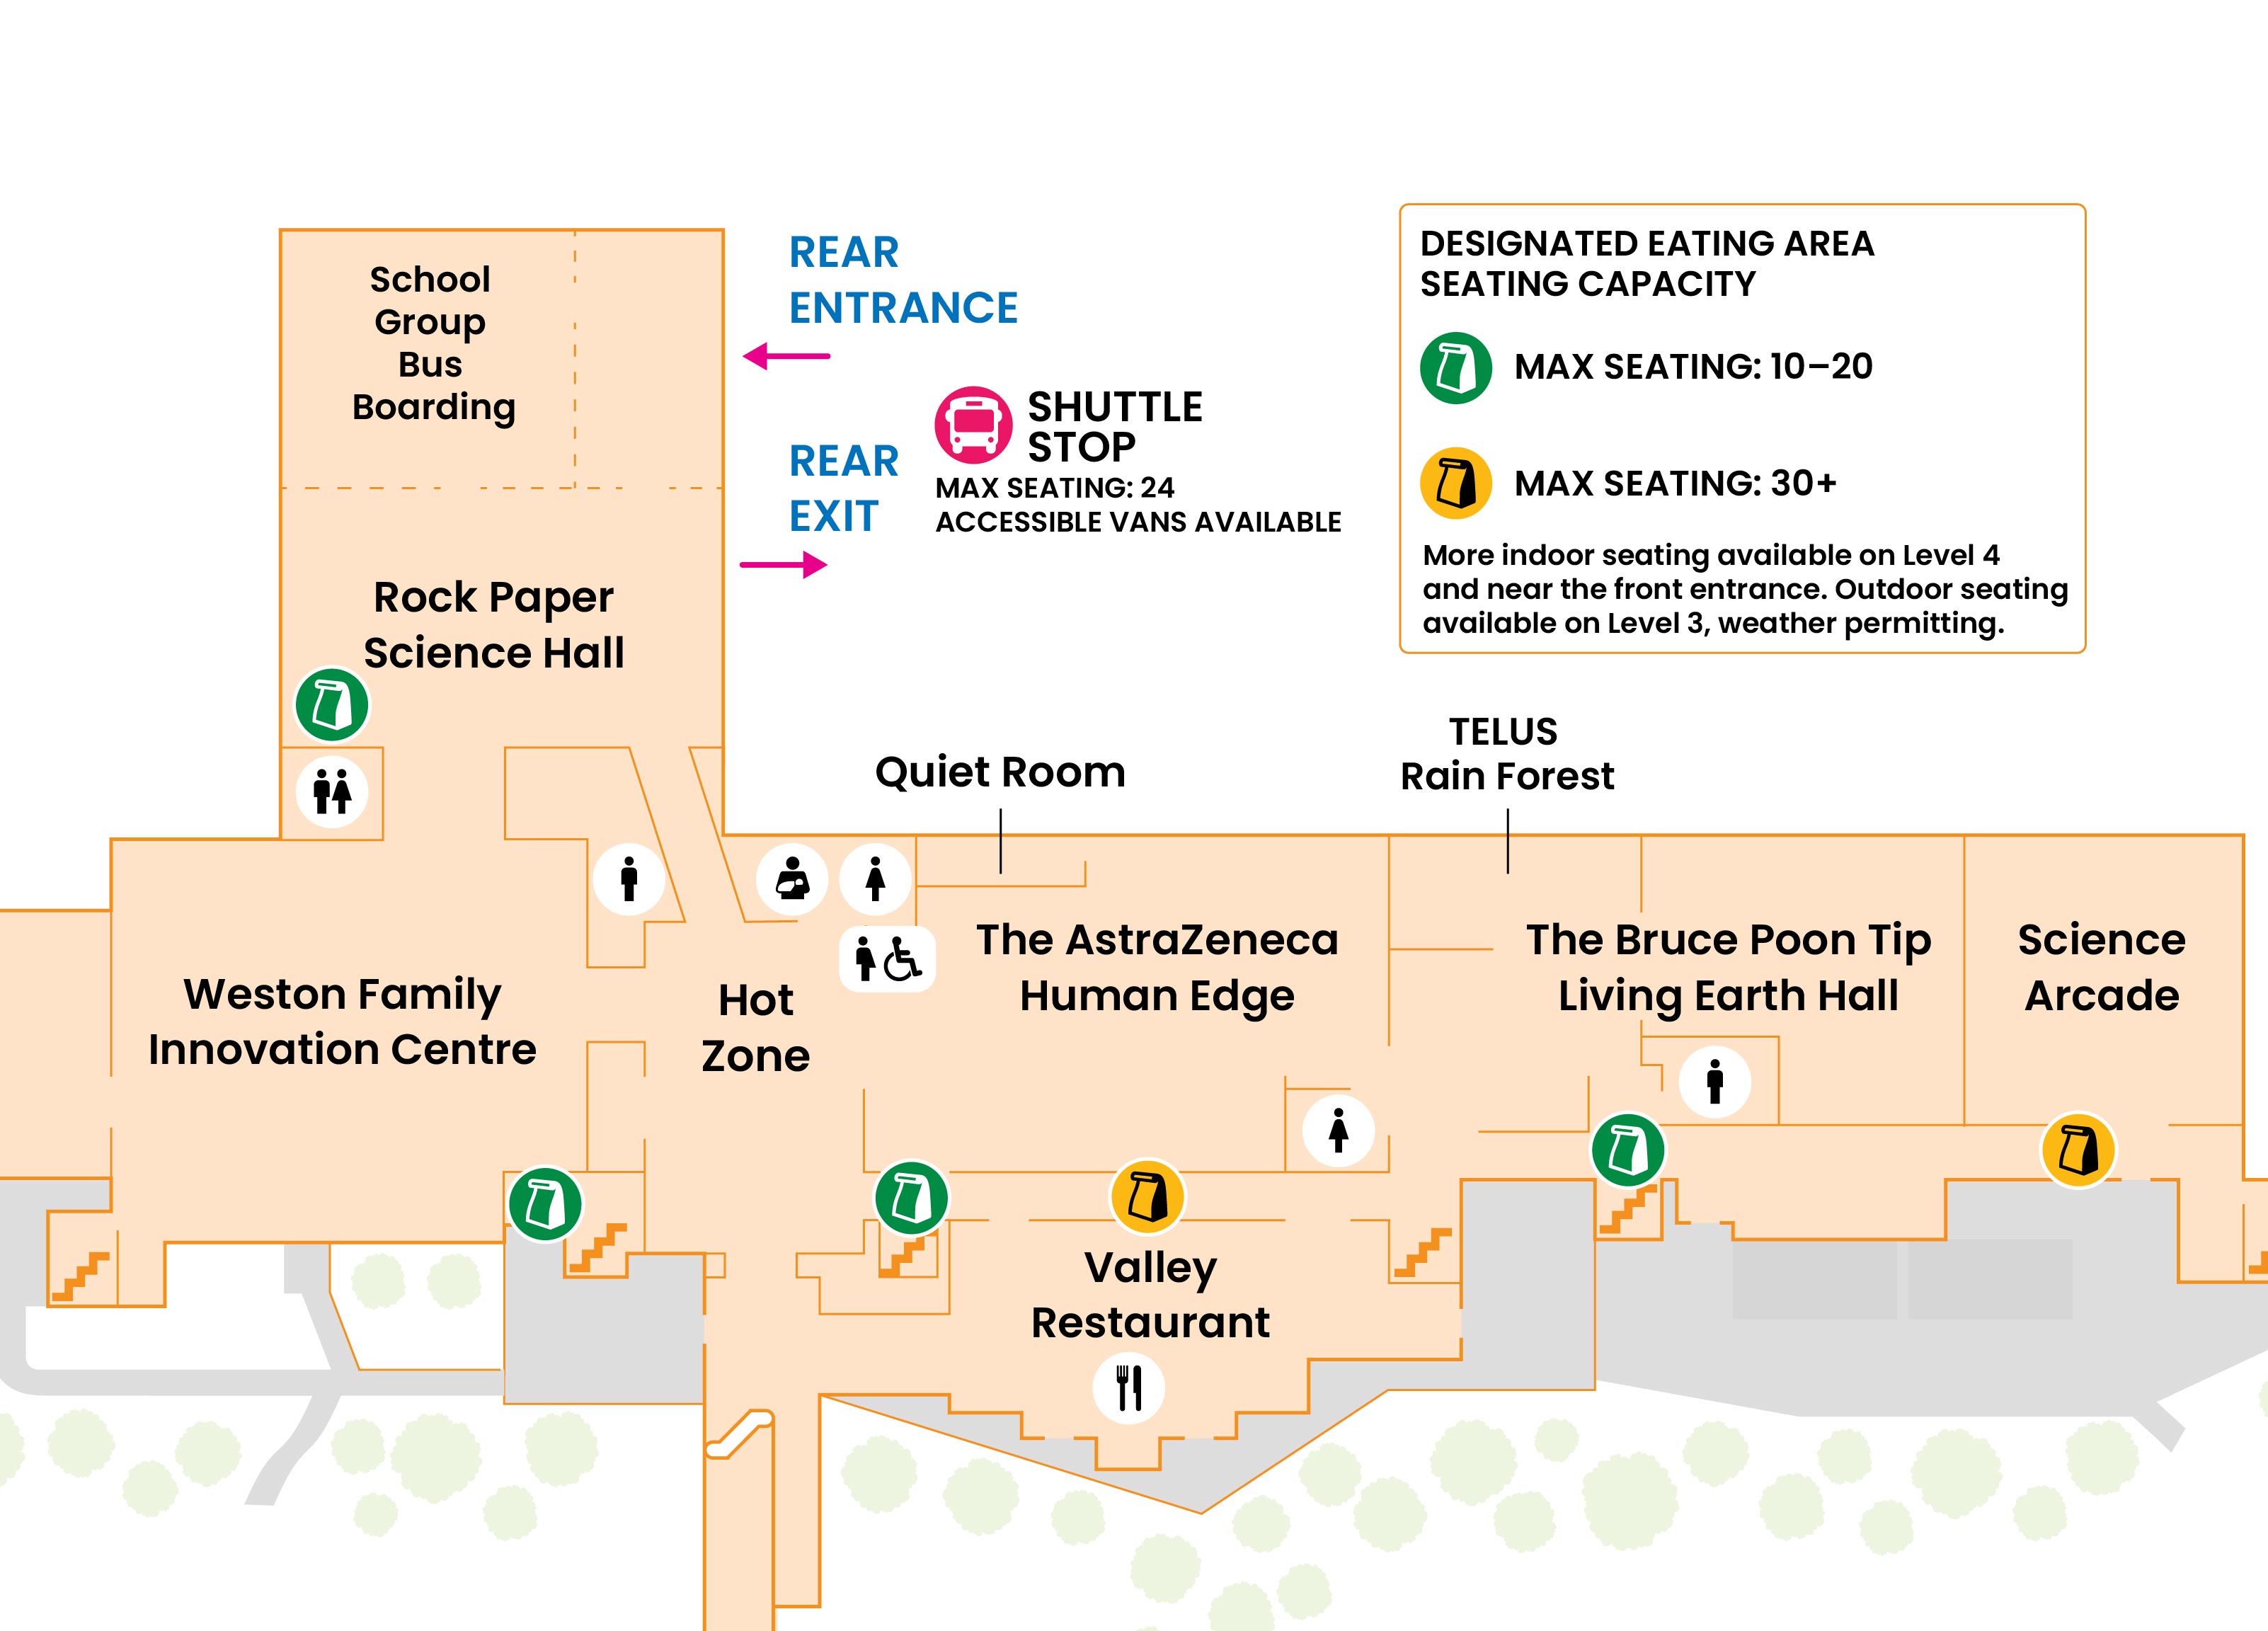 Map showing various areas on Level 6 with seating for eating lunch, and the estimated capacities of these areas.